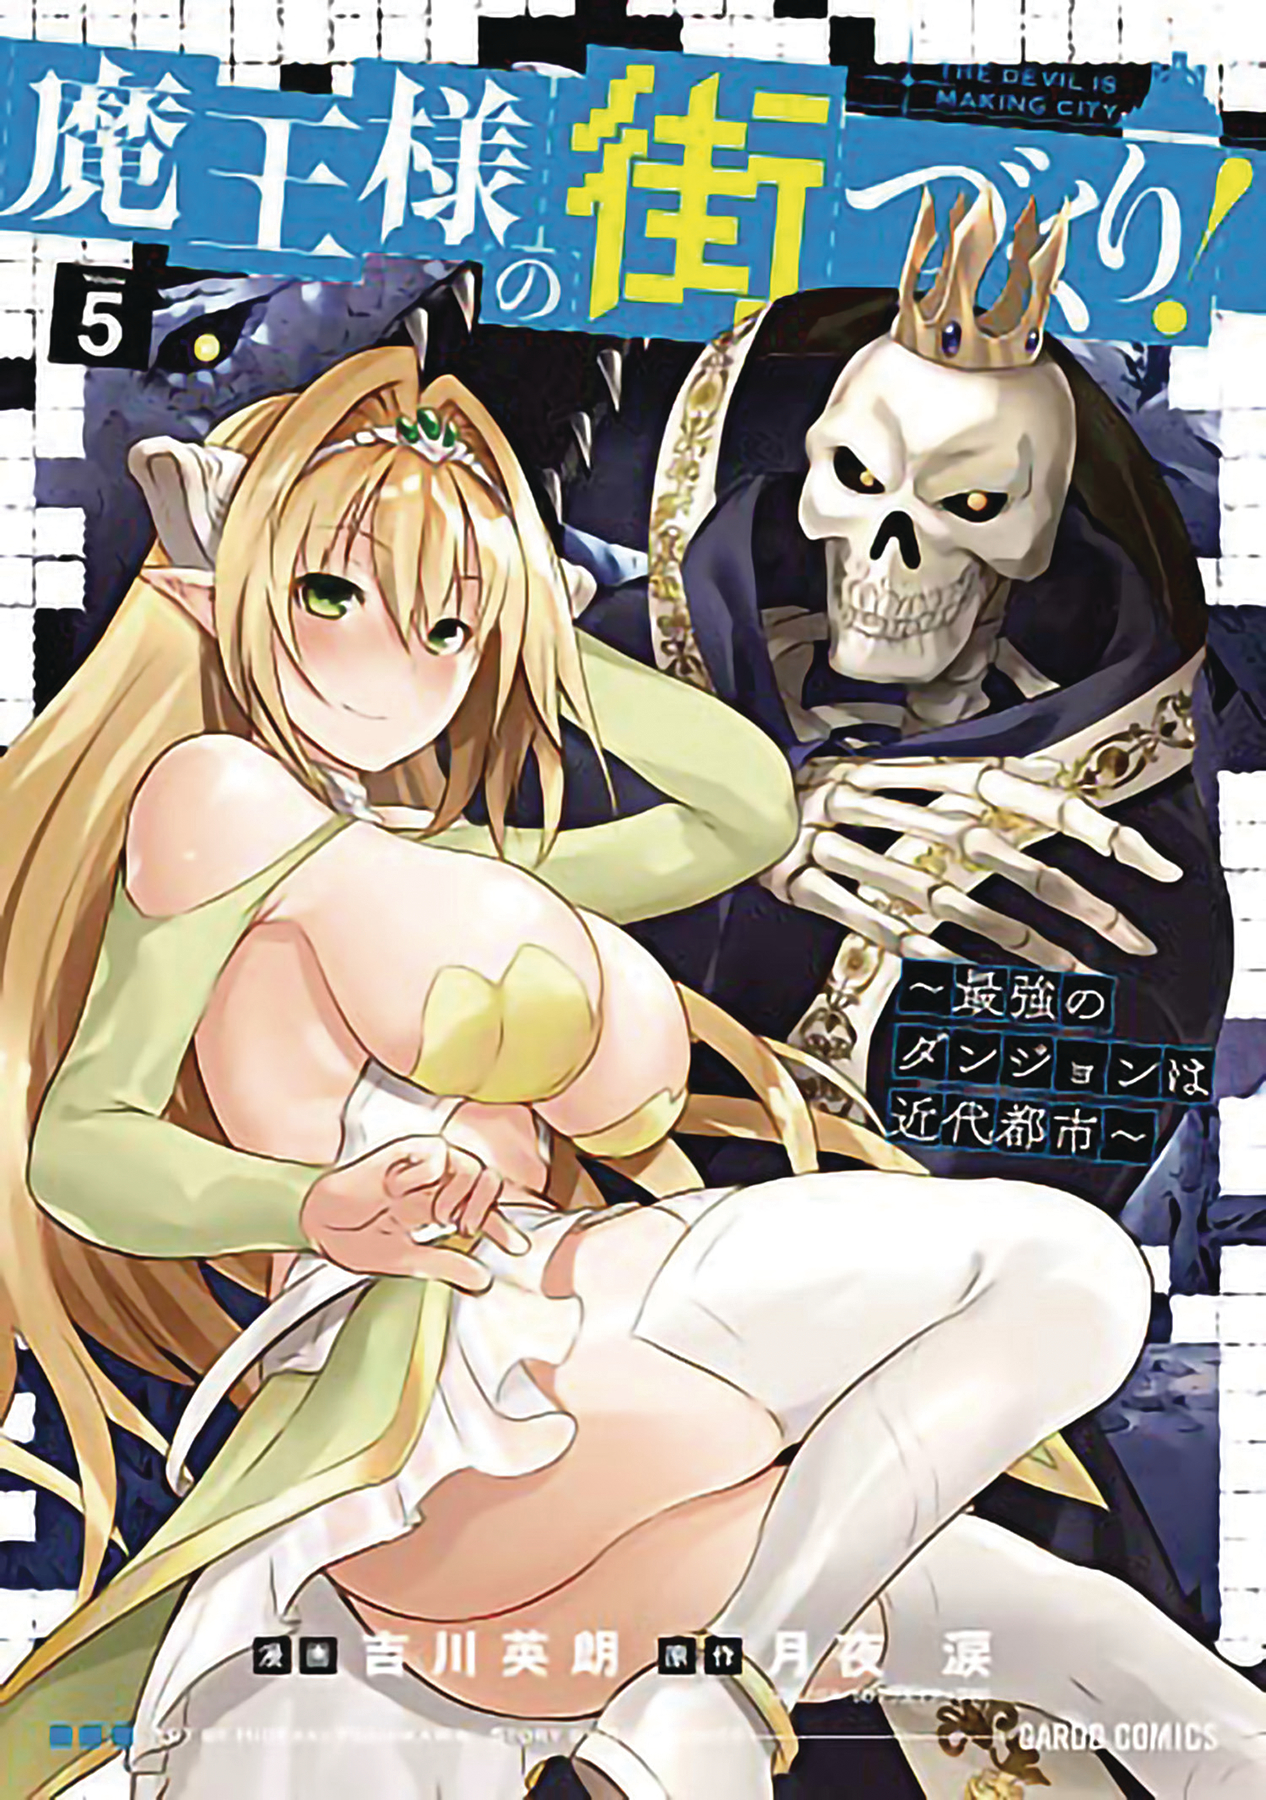 Dungeon Builder: The Demon King's Labyrinth is a Modern City! Manga Volume 5 (Mature)